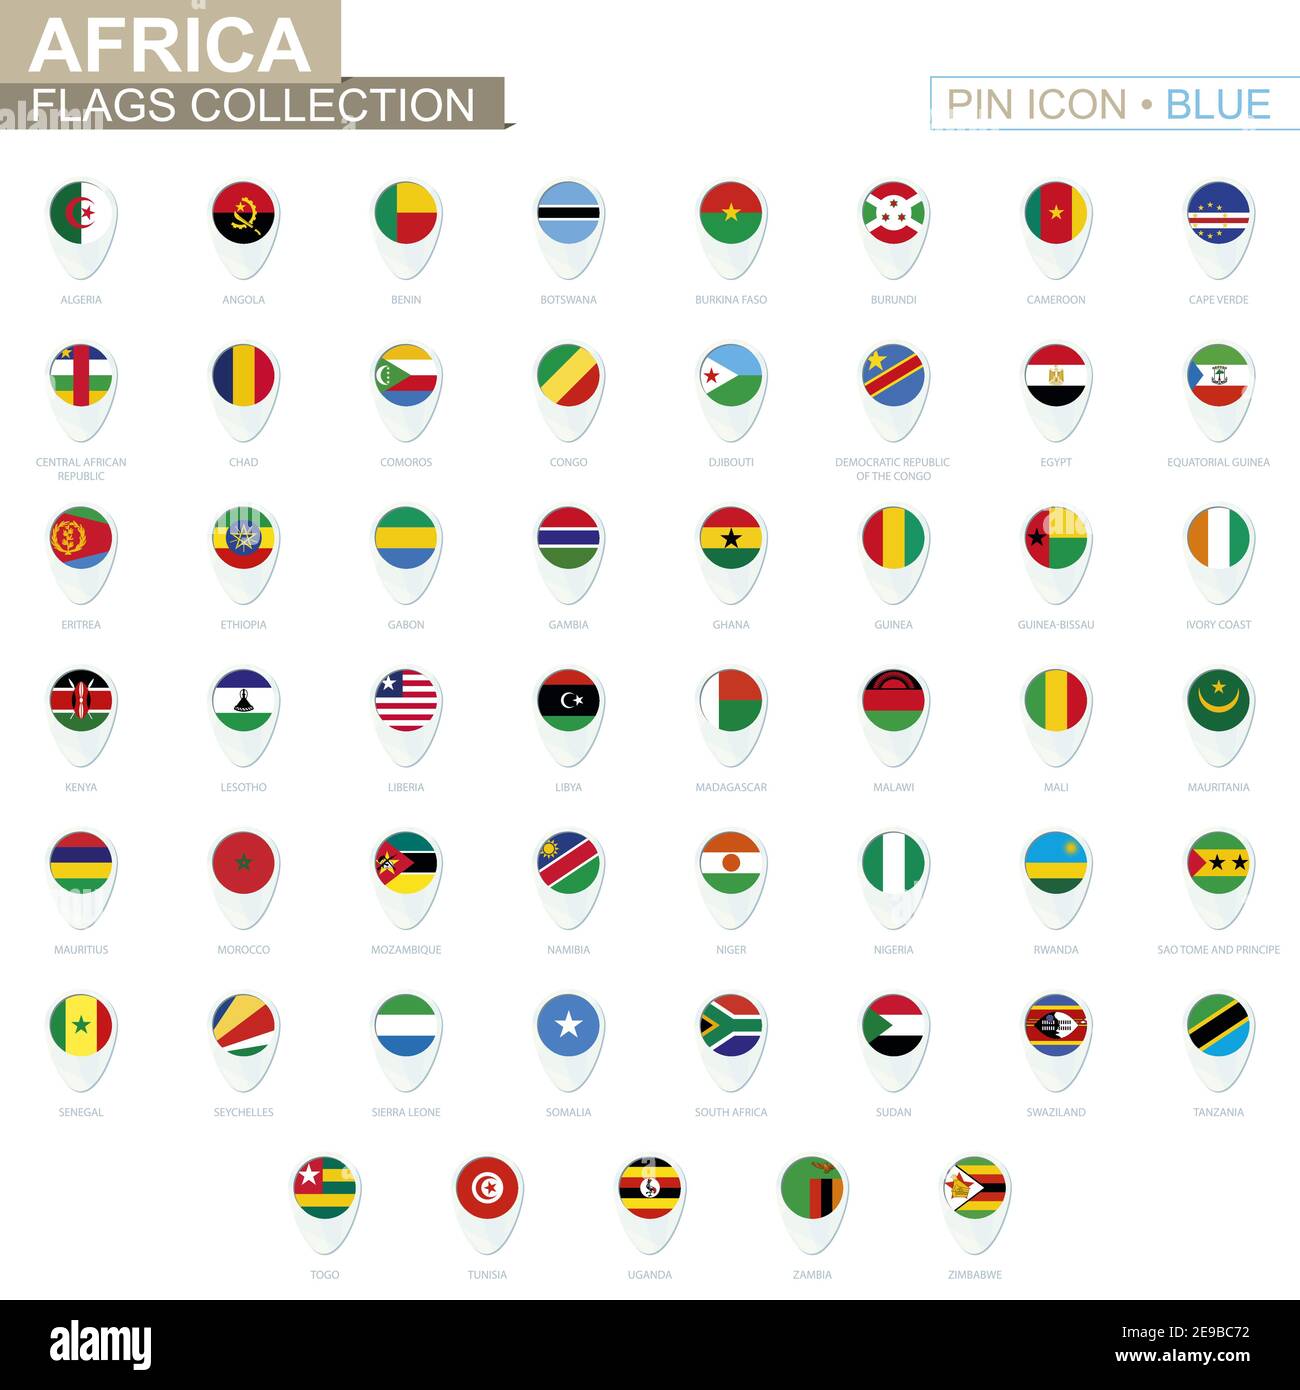 Africa Flags Collection Big Set Of Blue Pin Icon With Flags Of African Countries Vector 7723